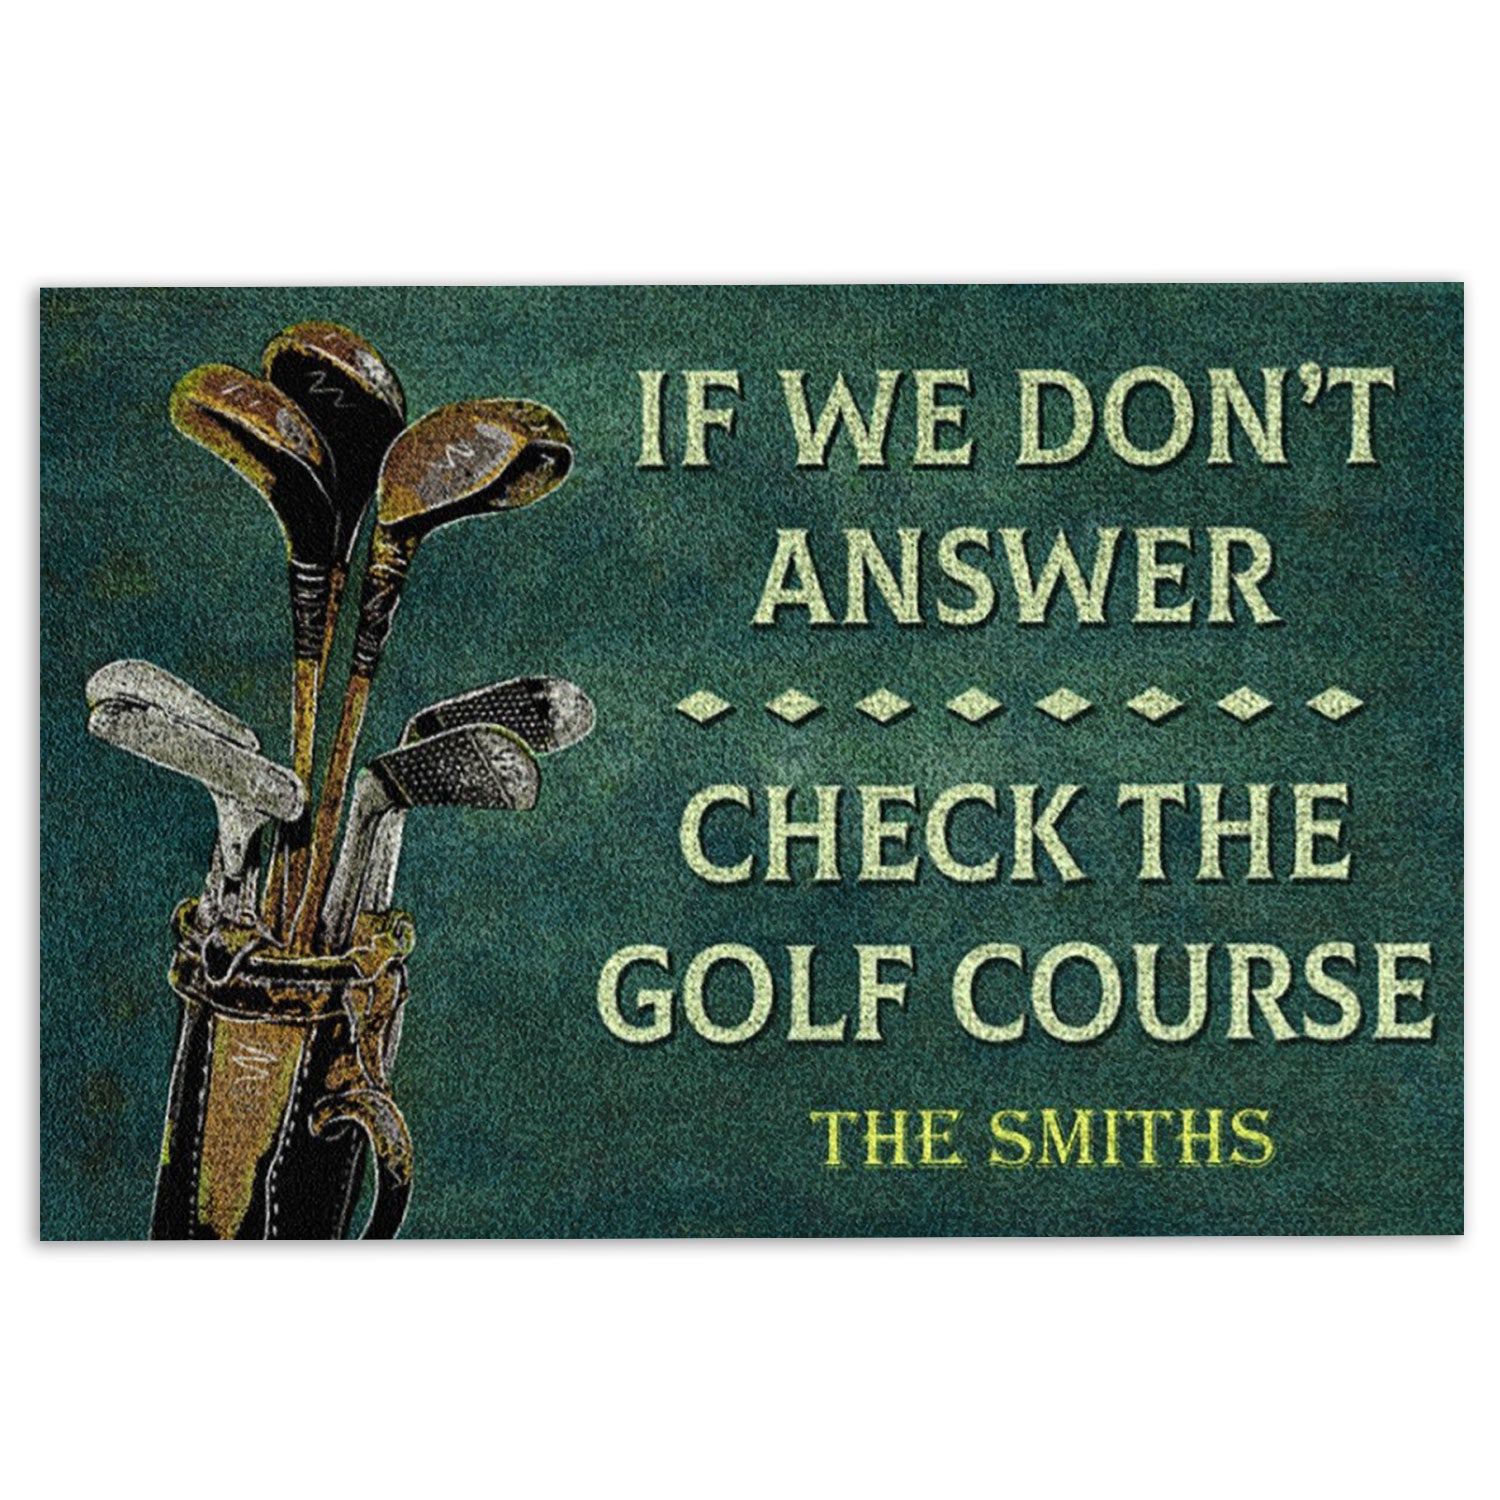 Ohaprints-Doormat-Outdoor-Indoor-Golf-If-We-Dont-Answer-Check-The-Course-Custom-Personalized-Name-Rubber-Door-Mat-1065-18'' x 30''